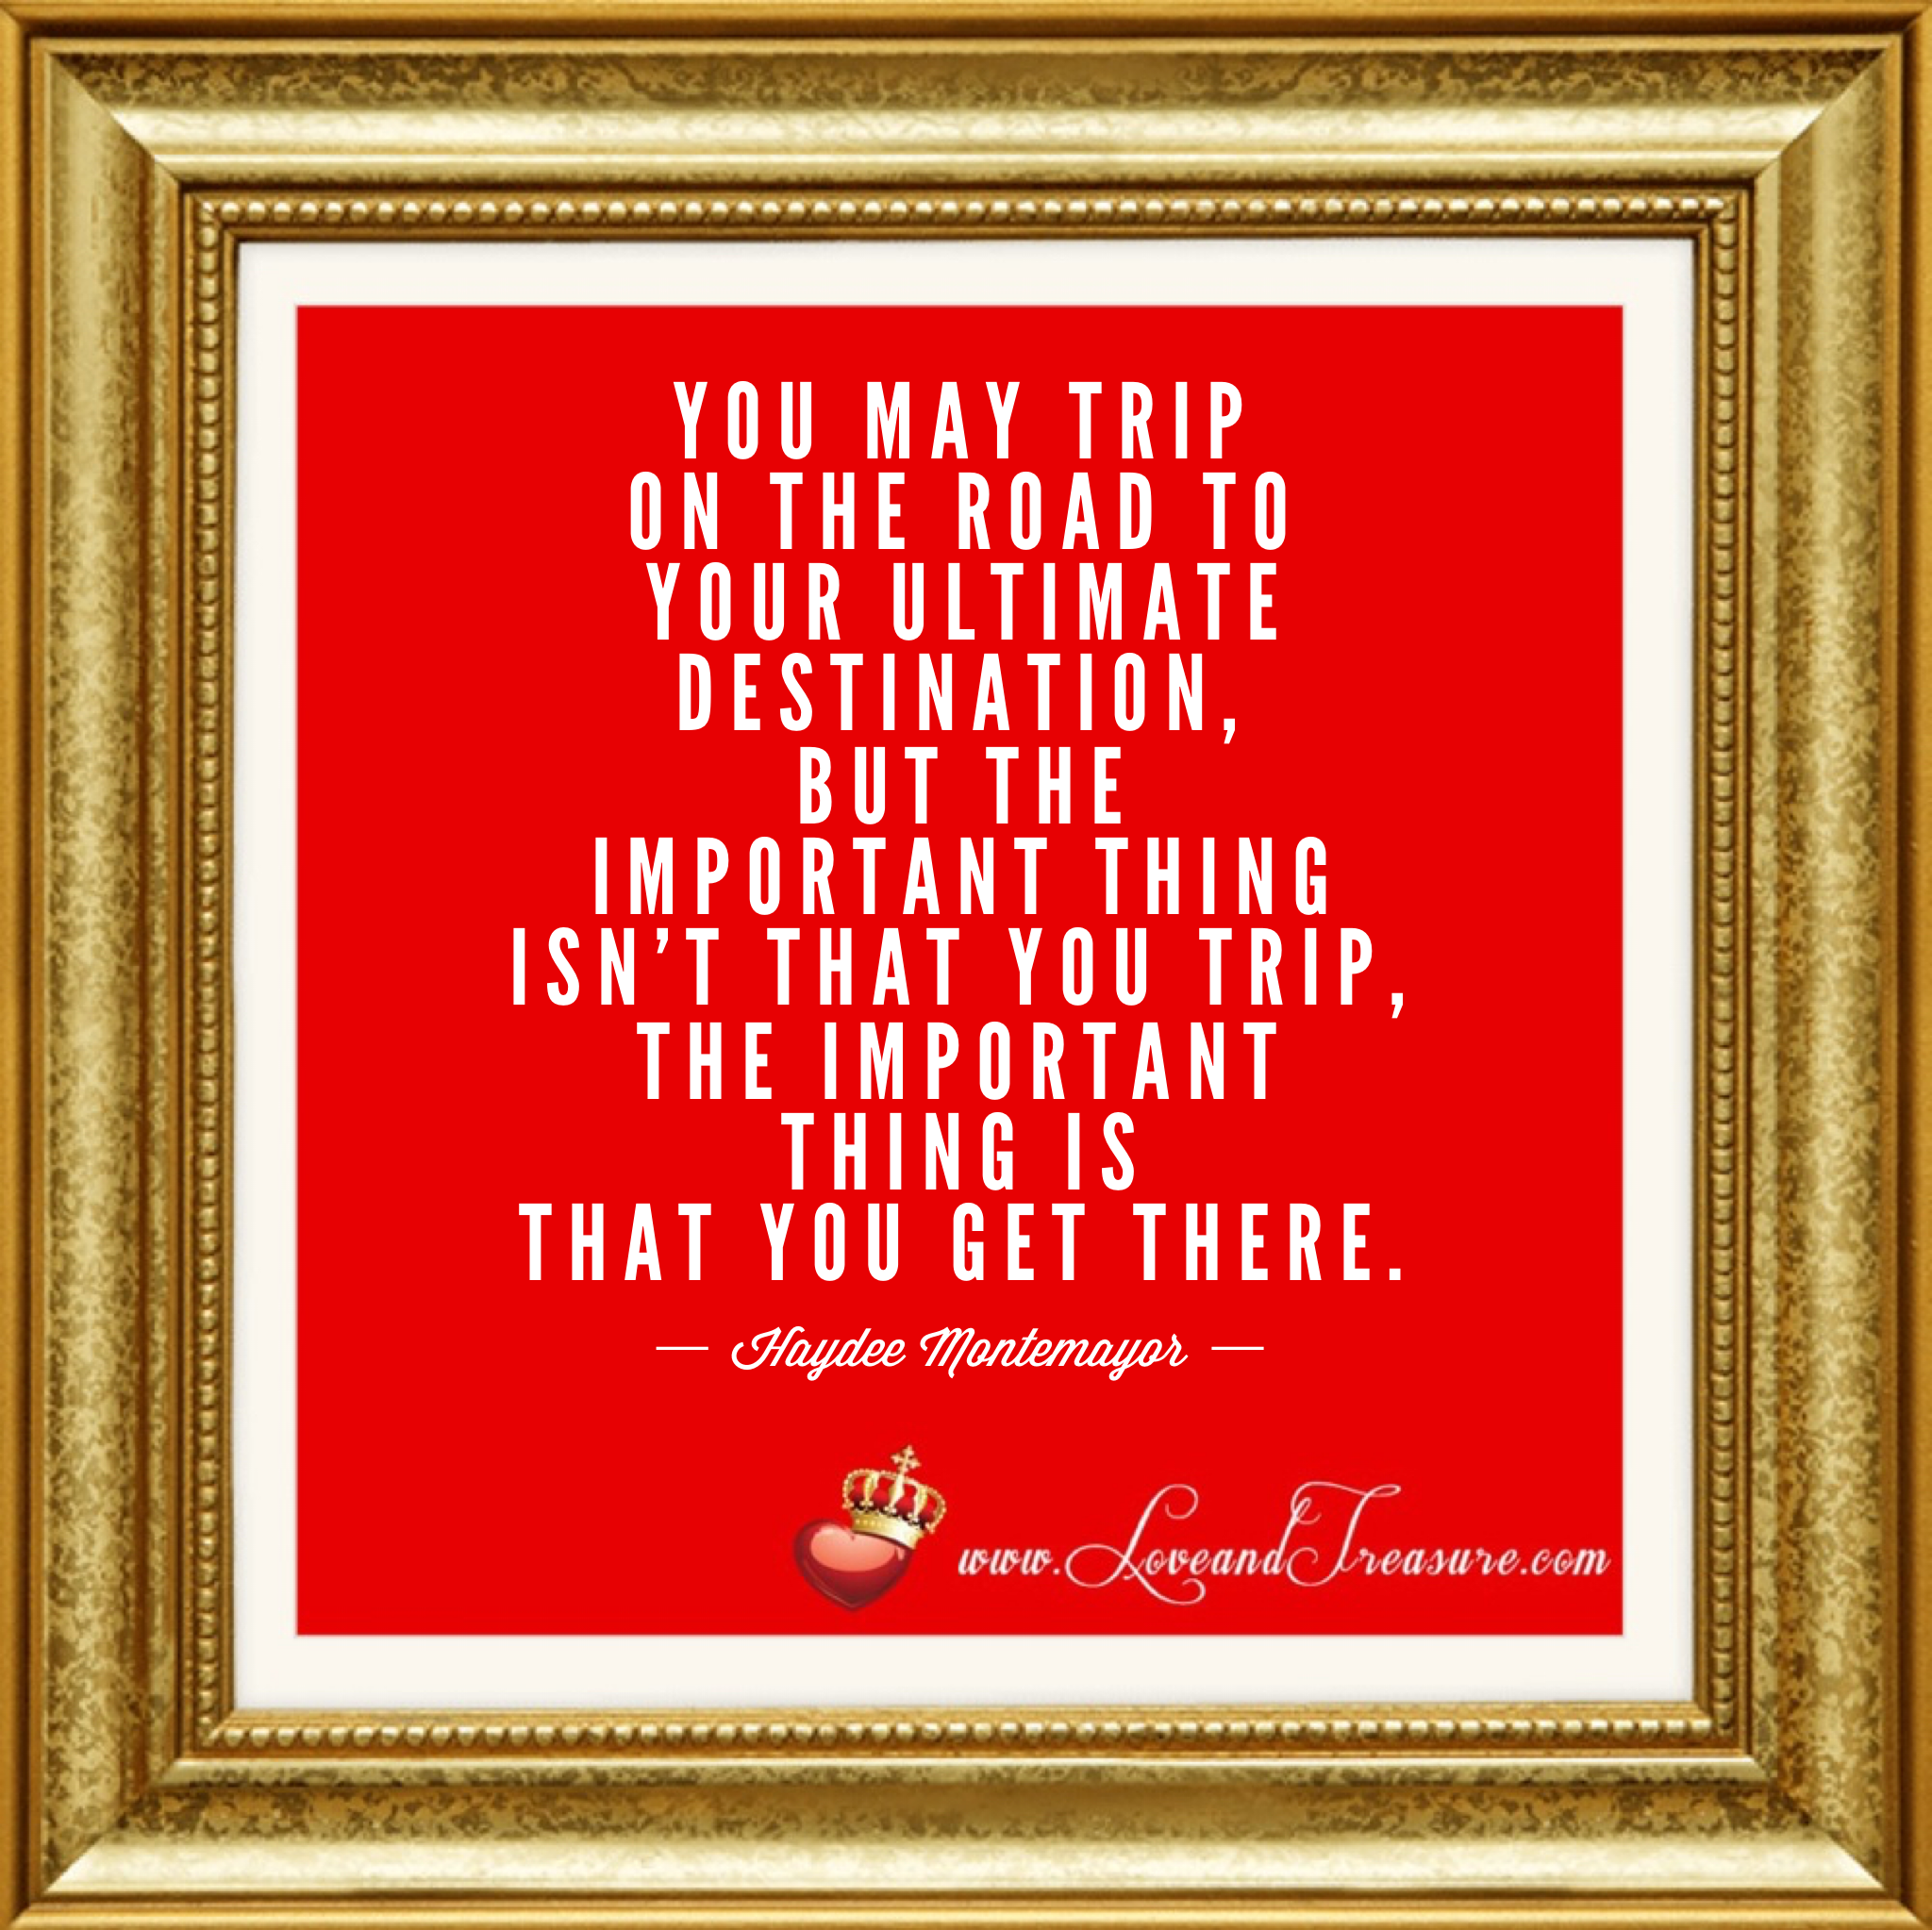 You may trip on the road to your ultimate destination, but the important thing isn't that you trip, the important thing is that you get there. by Haydee Montemayor from Love and Treasure blog